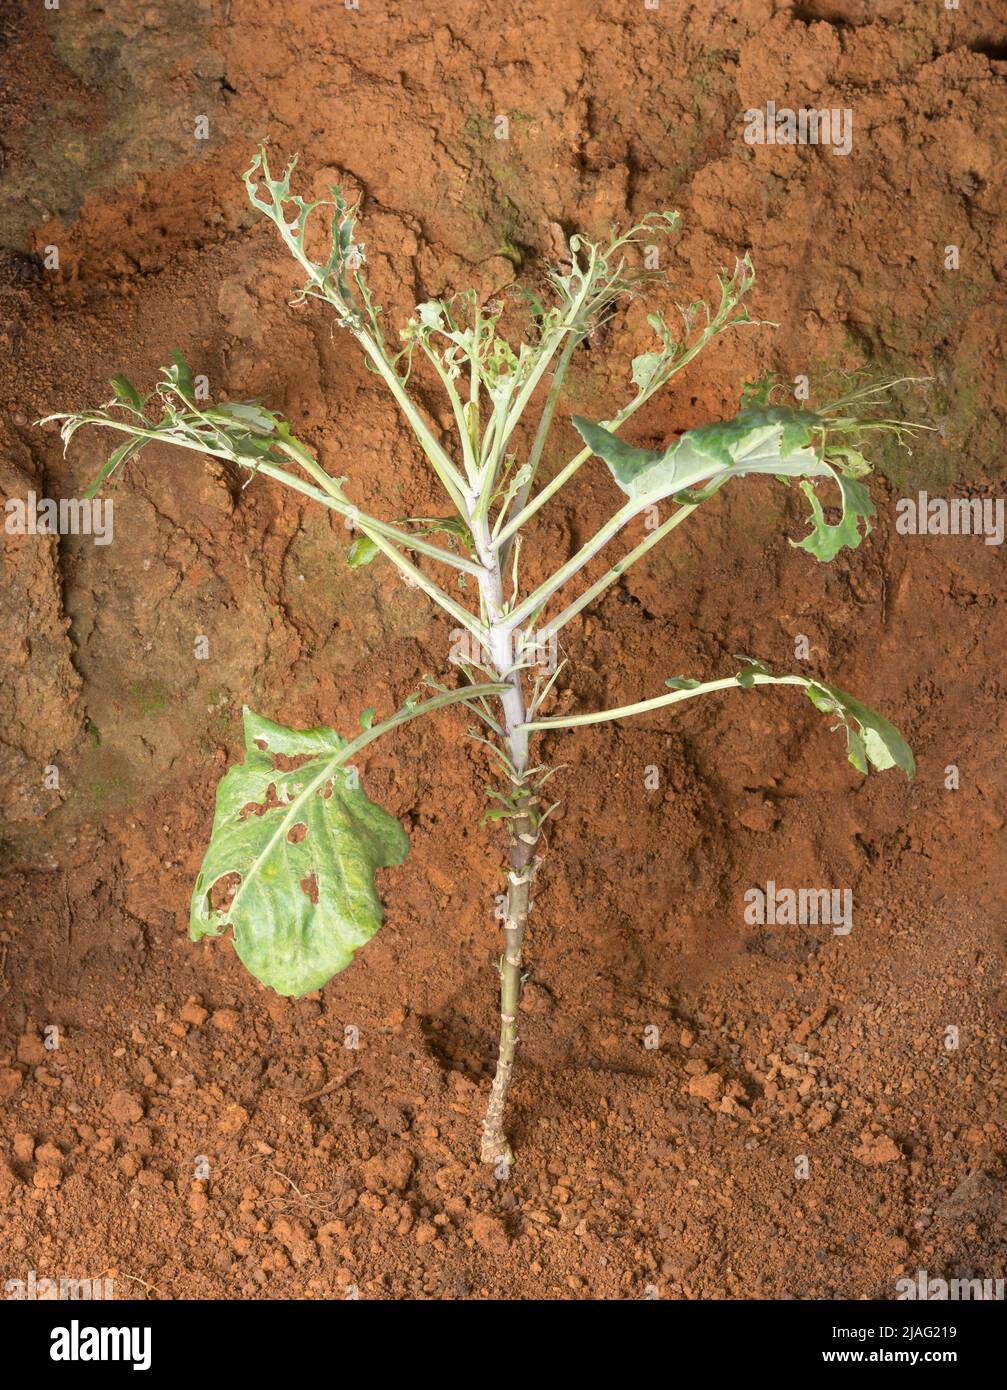 young cabbage plant damaged by insect pests, caterpillars and cabbage worm, ticks and vegetable plant diseases Stock Photo